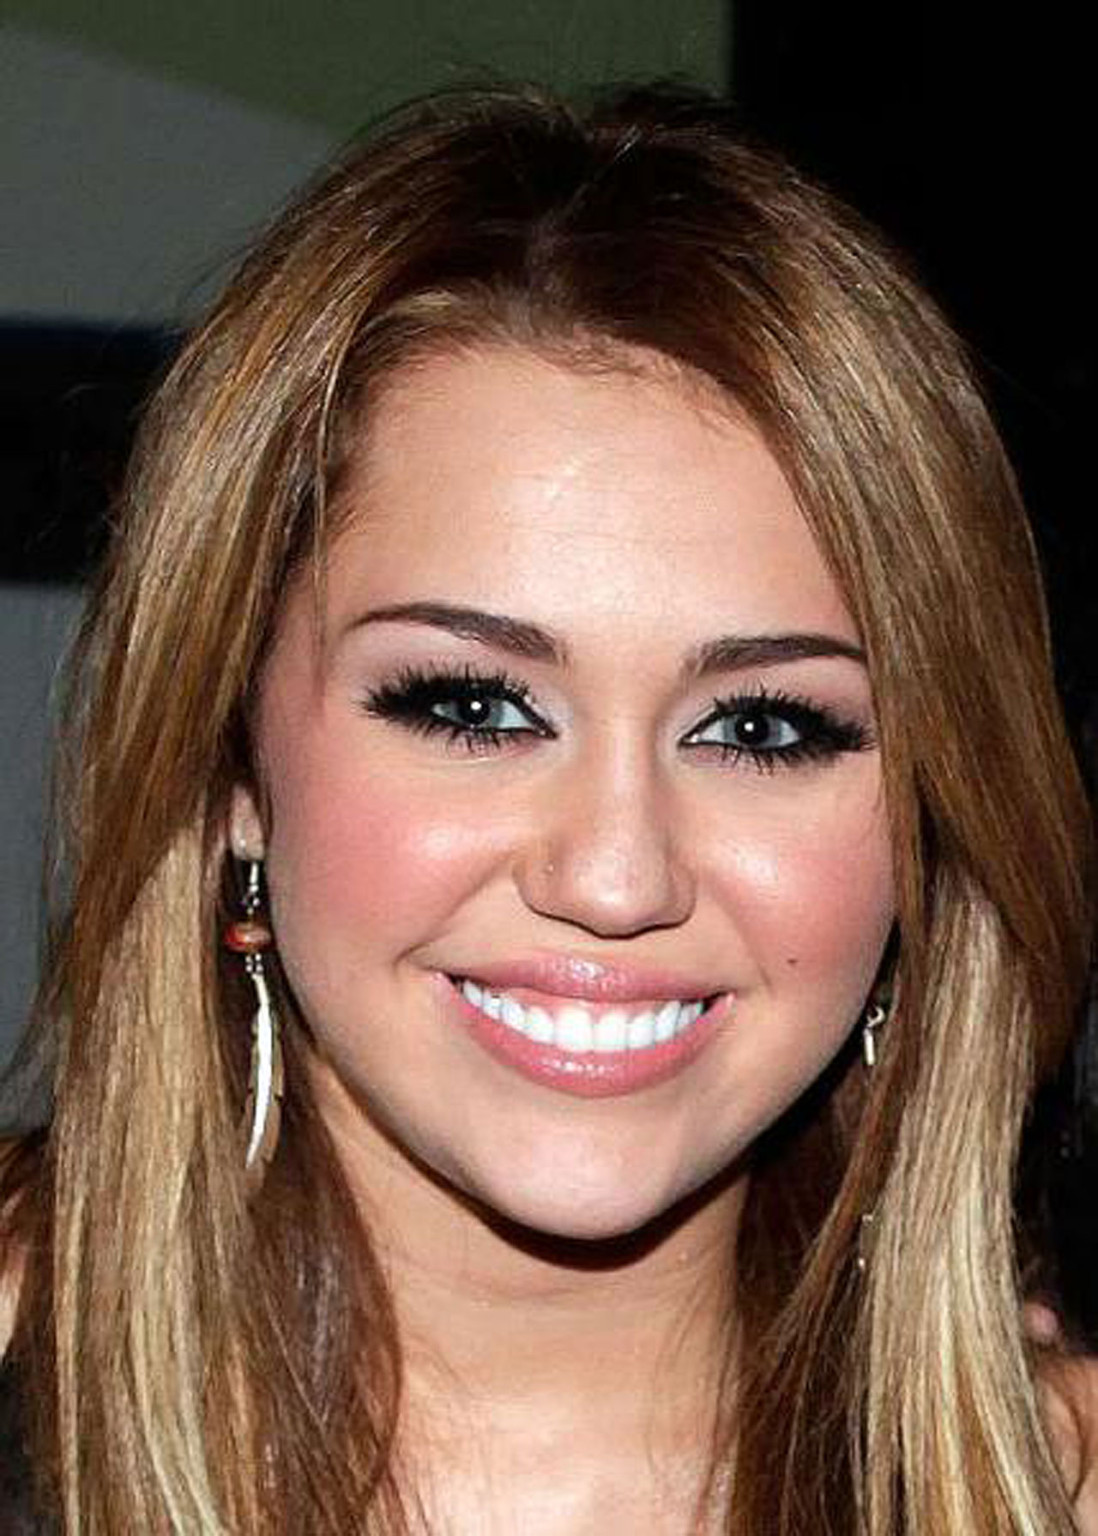 Miley Cyrus young and cute singer celebrated her eighteenth birthday #75325524